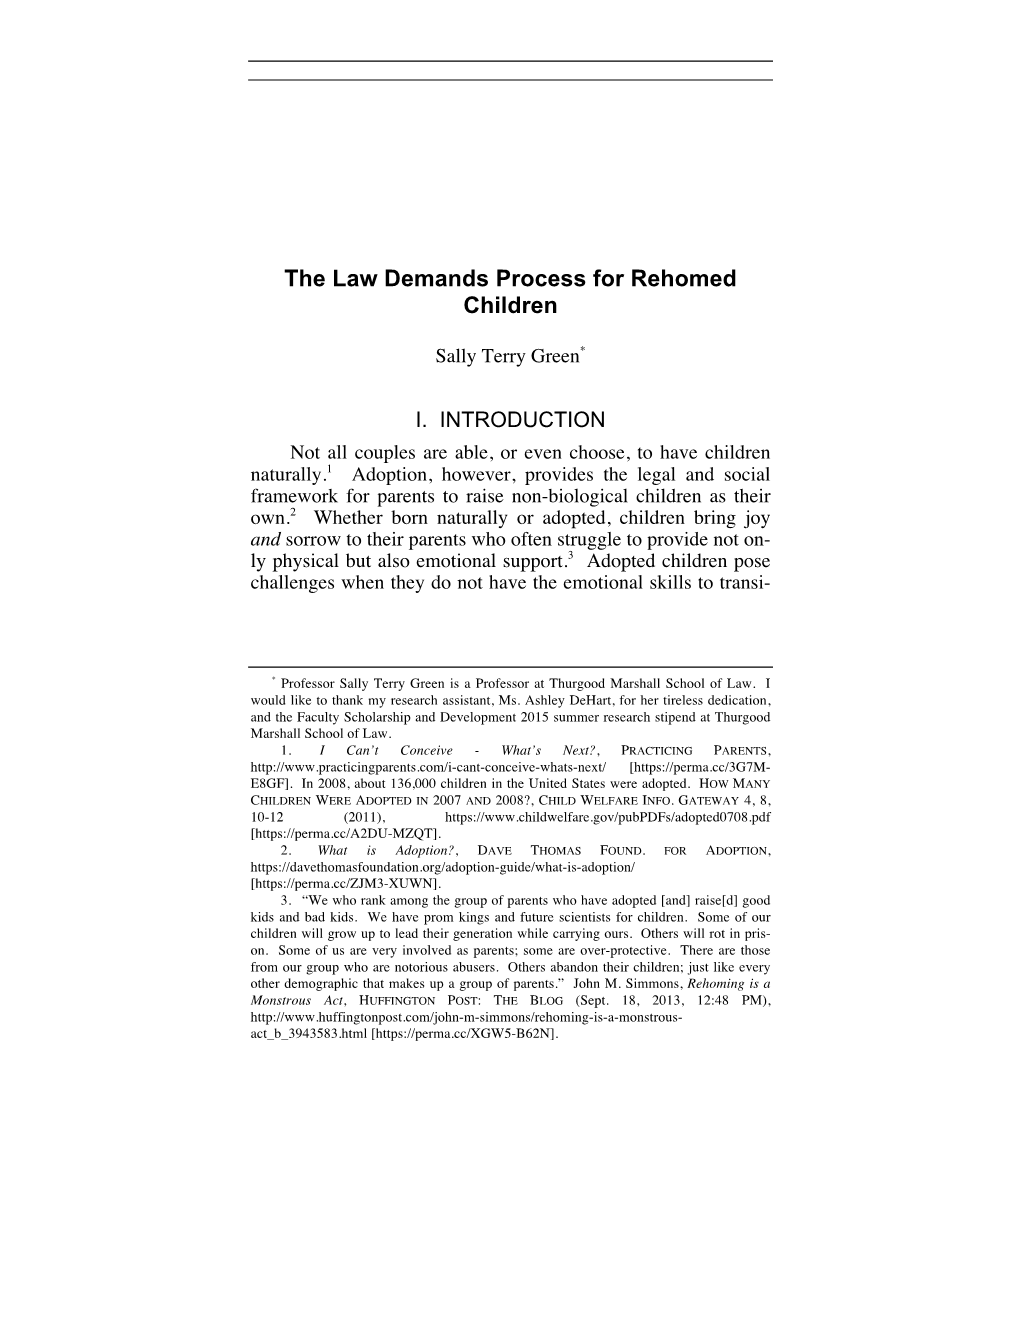 The Law Demands Process for Rehomed Children